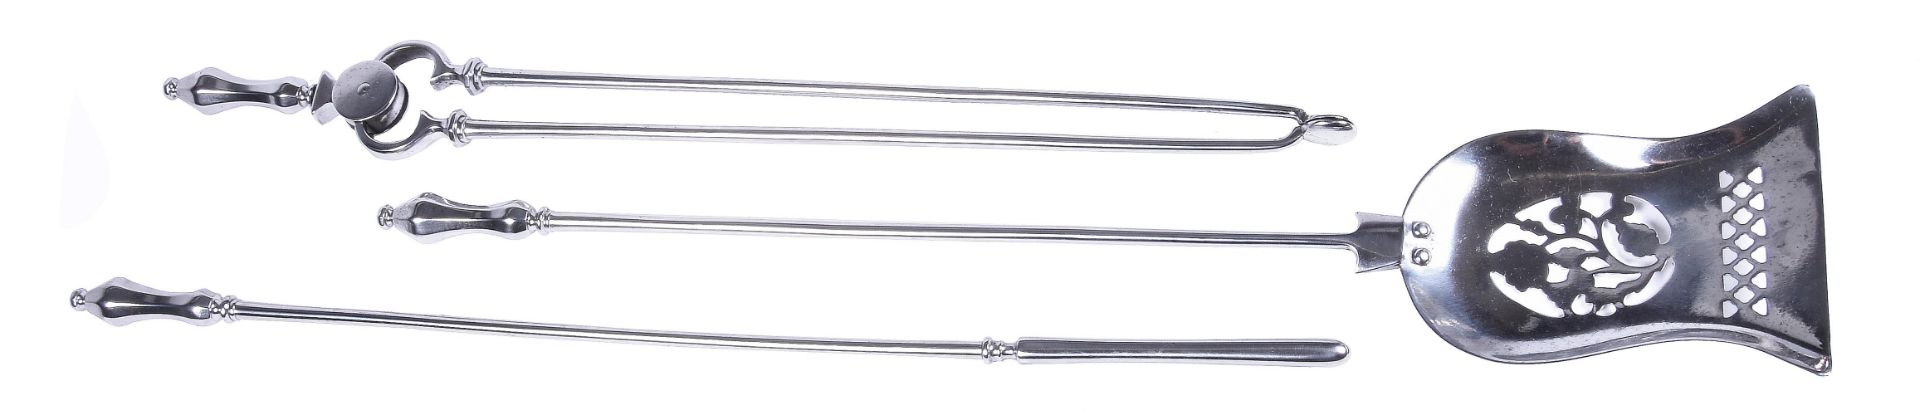 A SET OF POLISHED STEEL FIRE IRONS IN GEORGE III STYLE